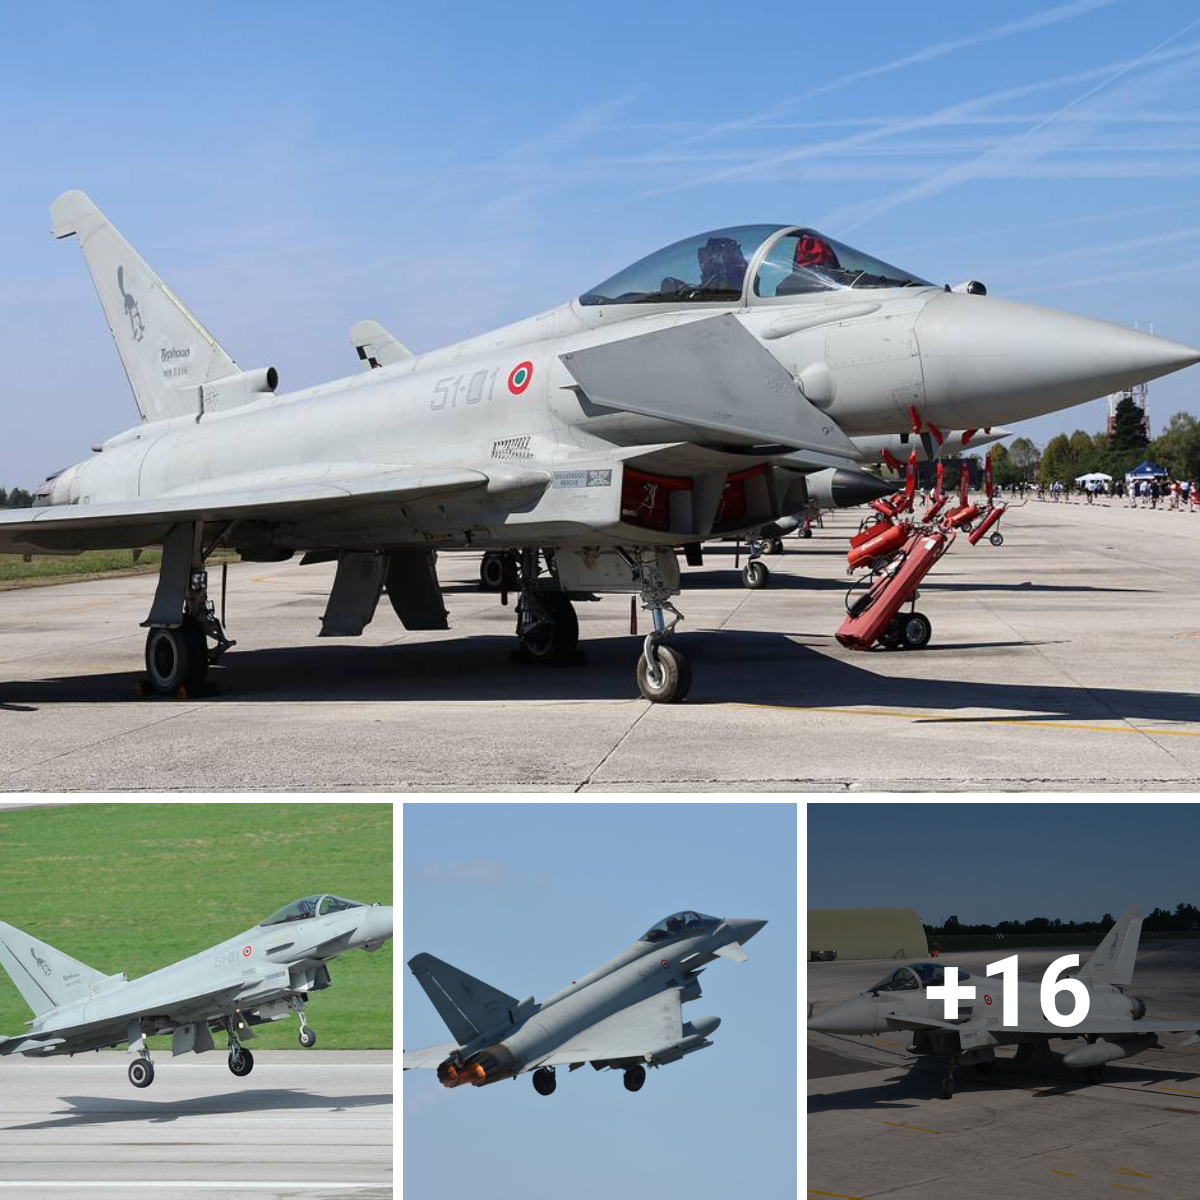 The 51st Triumph of the European Typhoon Squadron is welcomed by the Italian Air Force